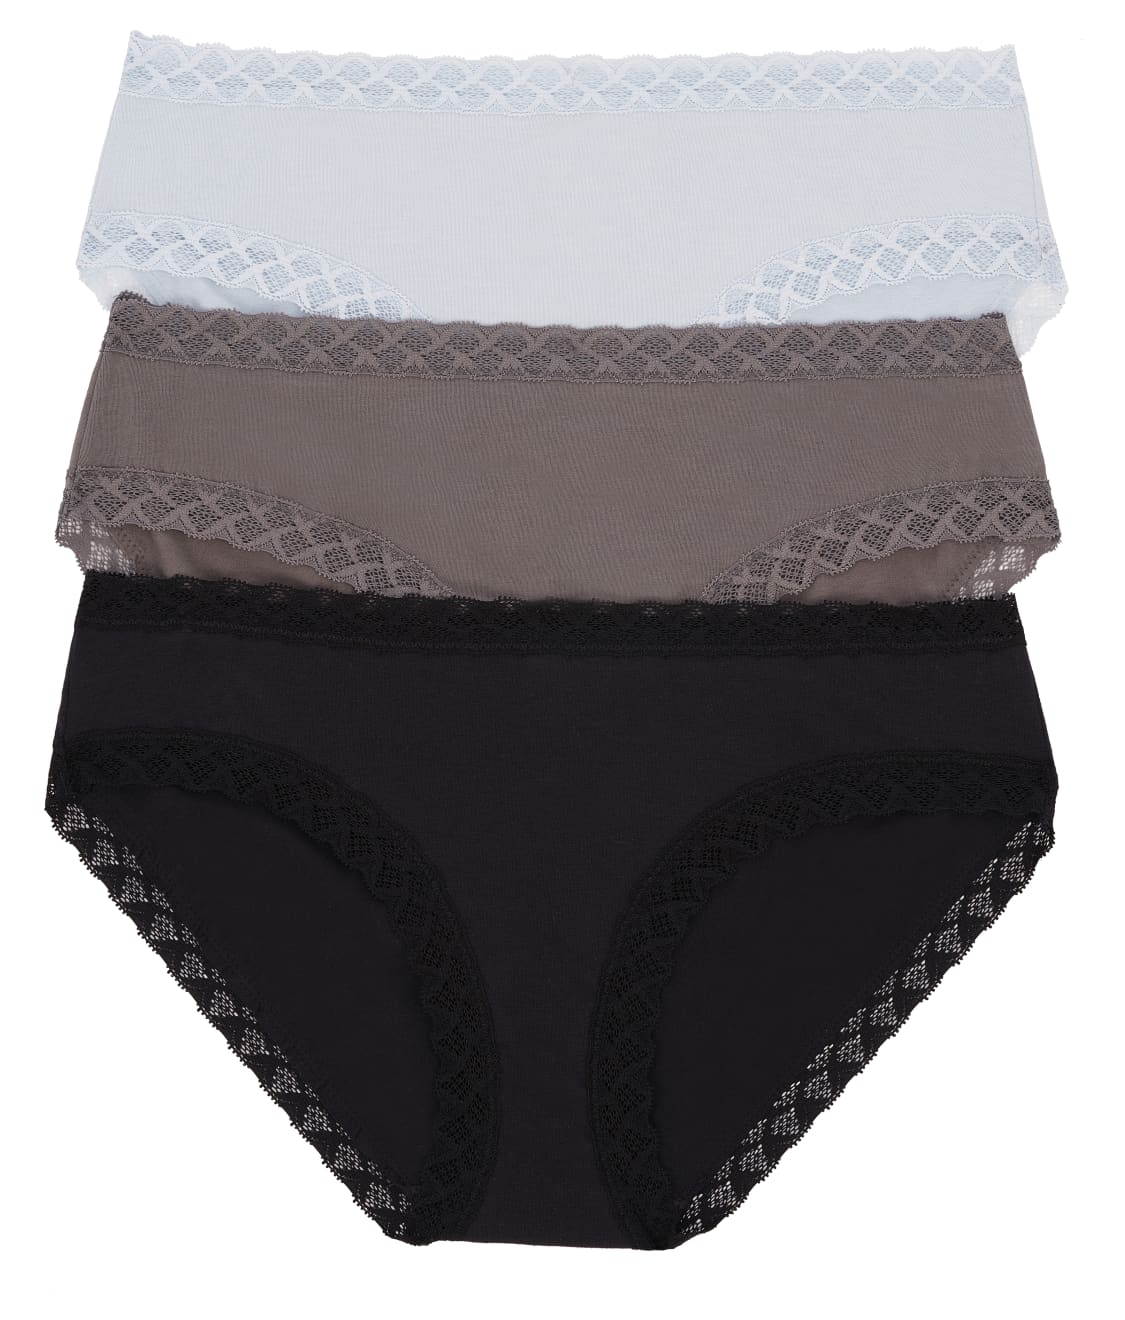 Natori Bliss Cotton Girl Brief 3-Pack & Reviews | Bare Necessities ...